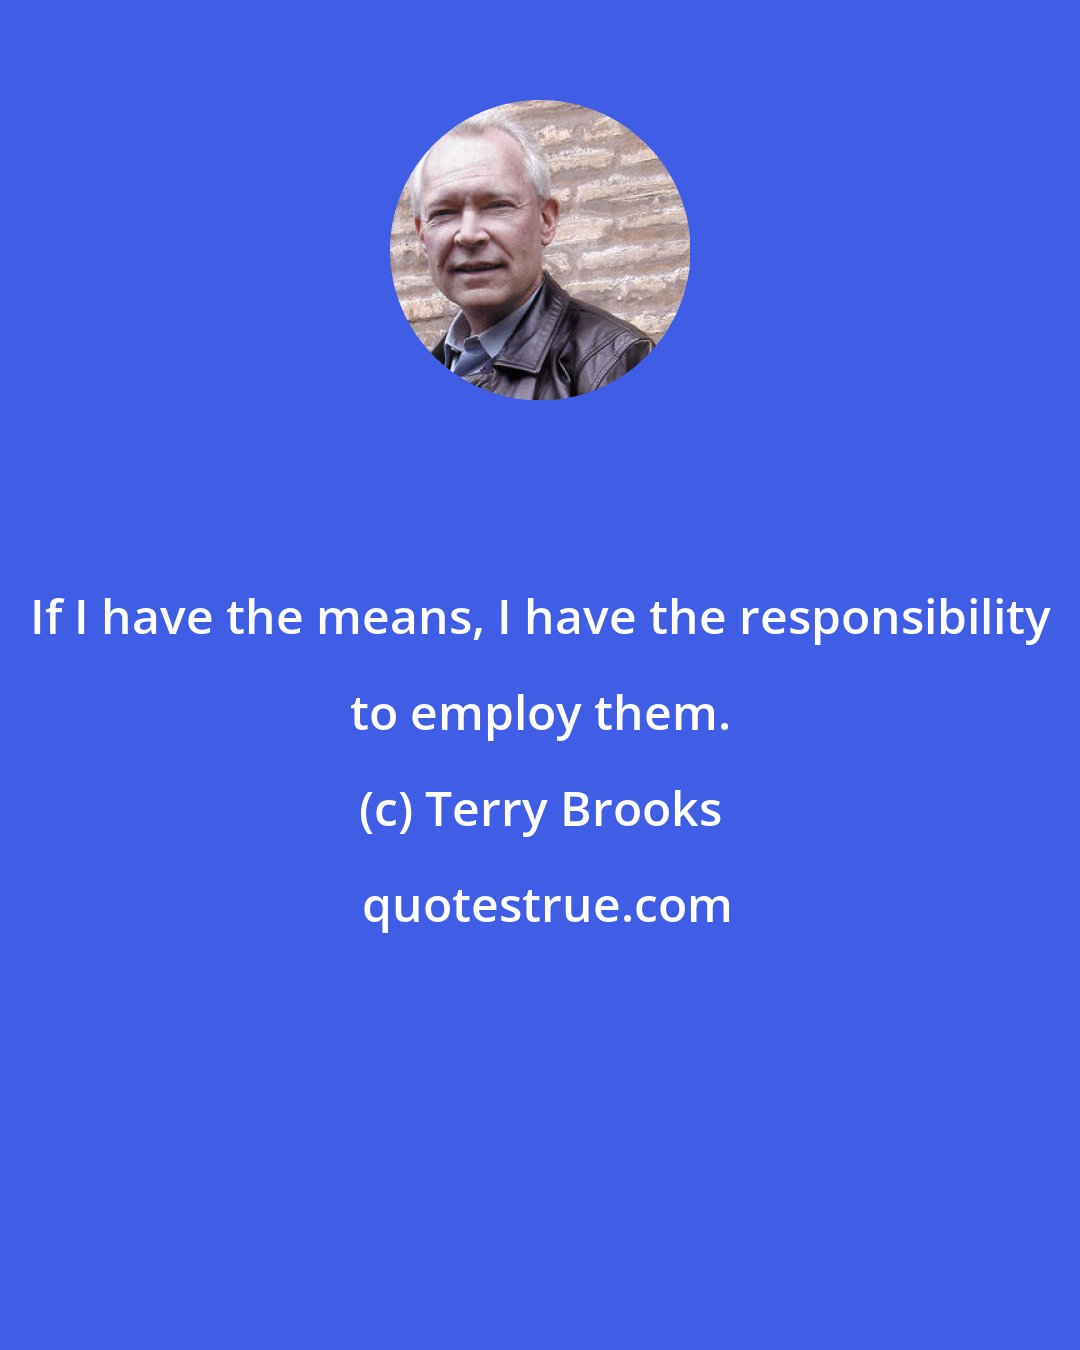 Terry Brooks: If I have the means, I have the responsibility to employ them.